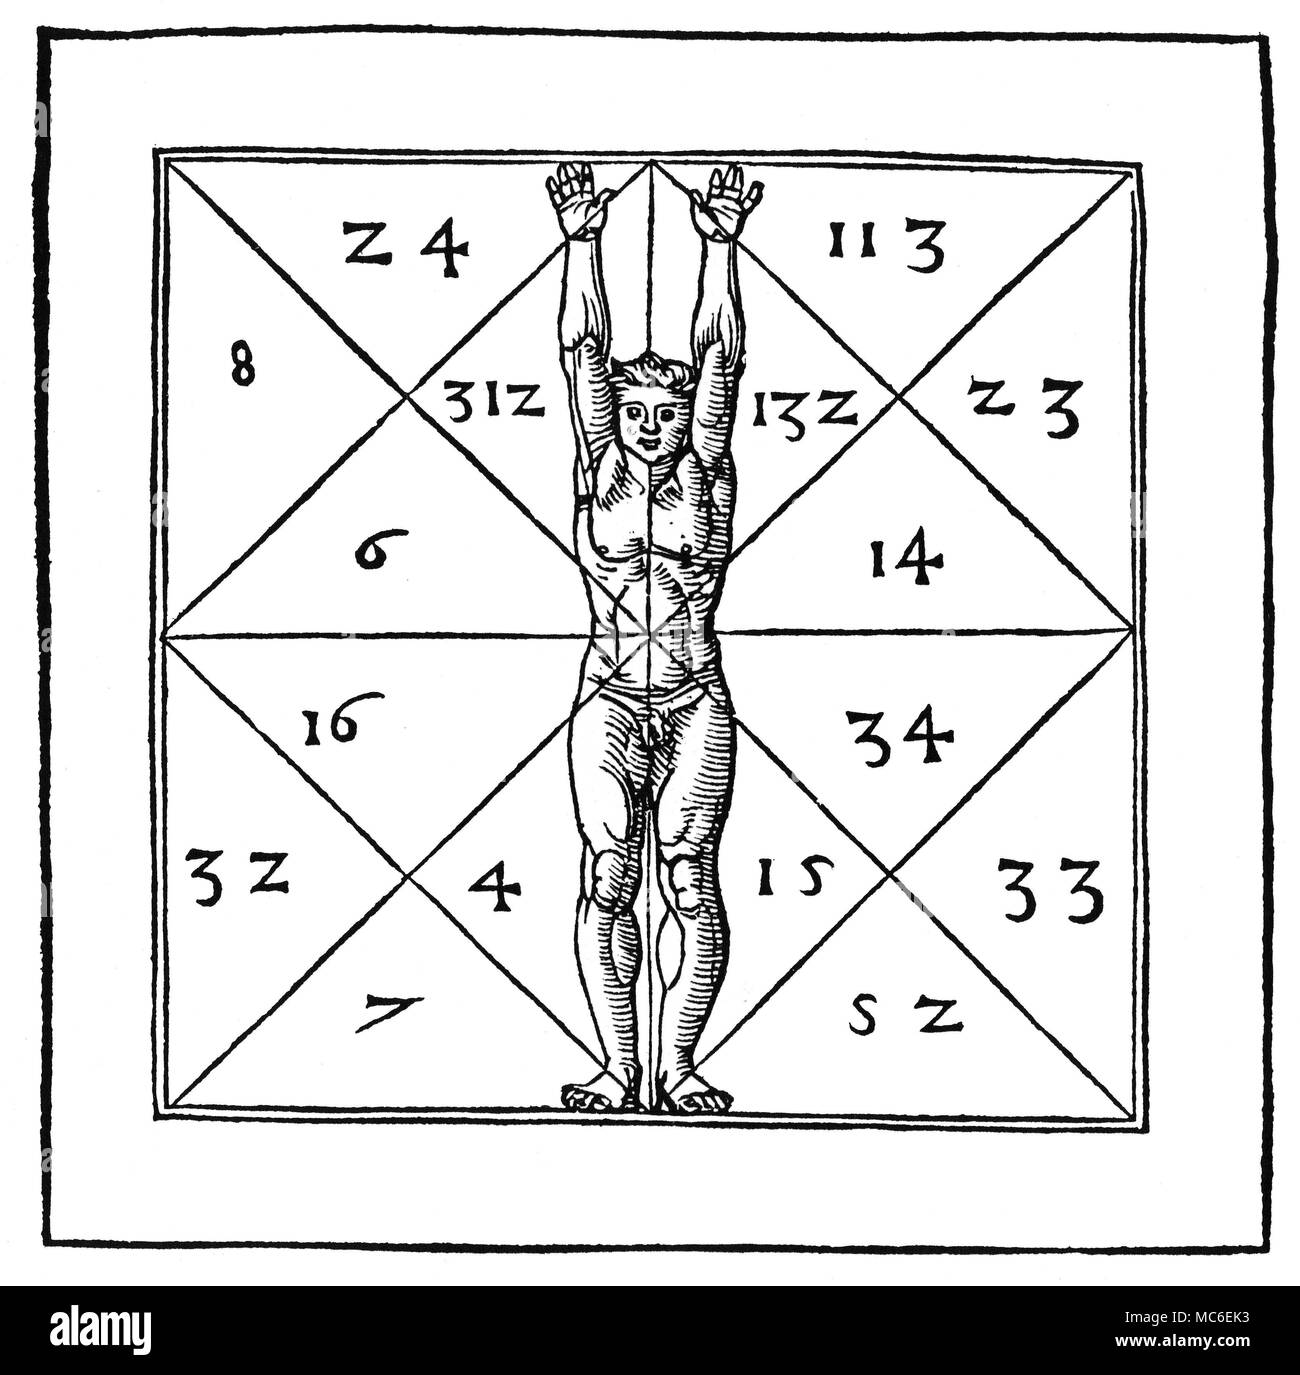 MAGIC SYMBOLS - THE UPRIGHT MAN The so-called upright Man, standing within a quadrated square, with arms upstretched. to emphasise the symmetry of the human frame. The centre of the larger square rests on the navel, and the figure is therefore an extension of (a realisation of) the pentagrammic man. In occult philosophy, the upright Man is symbol of the initiate - of the one with a developed Ego. From Cornelius Agrippa, De Occulta Philosophia, 1533 edition. Stock Photo